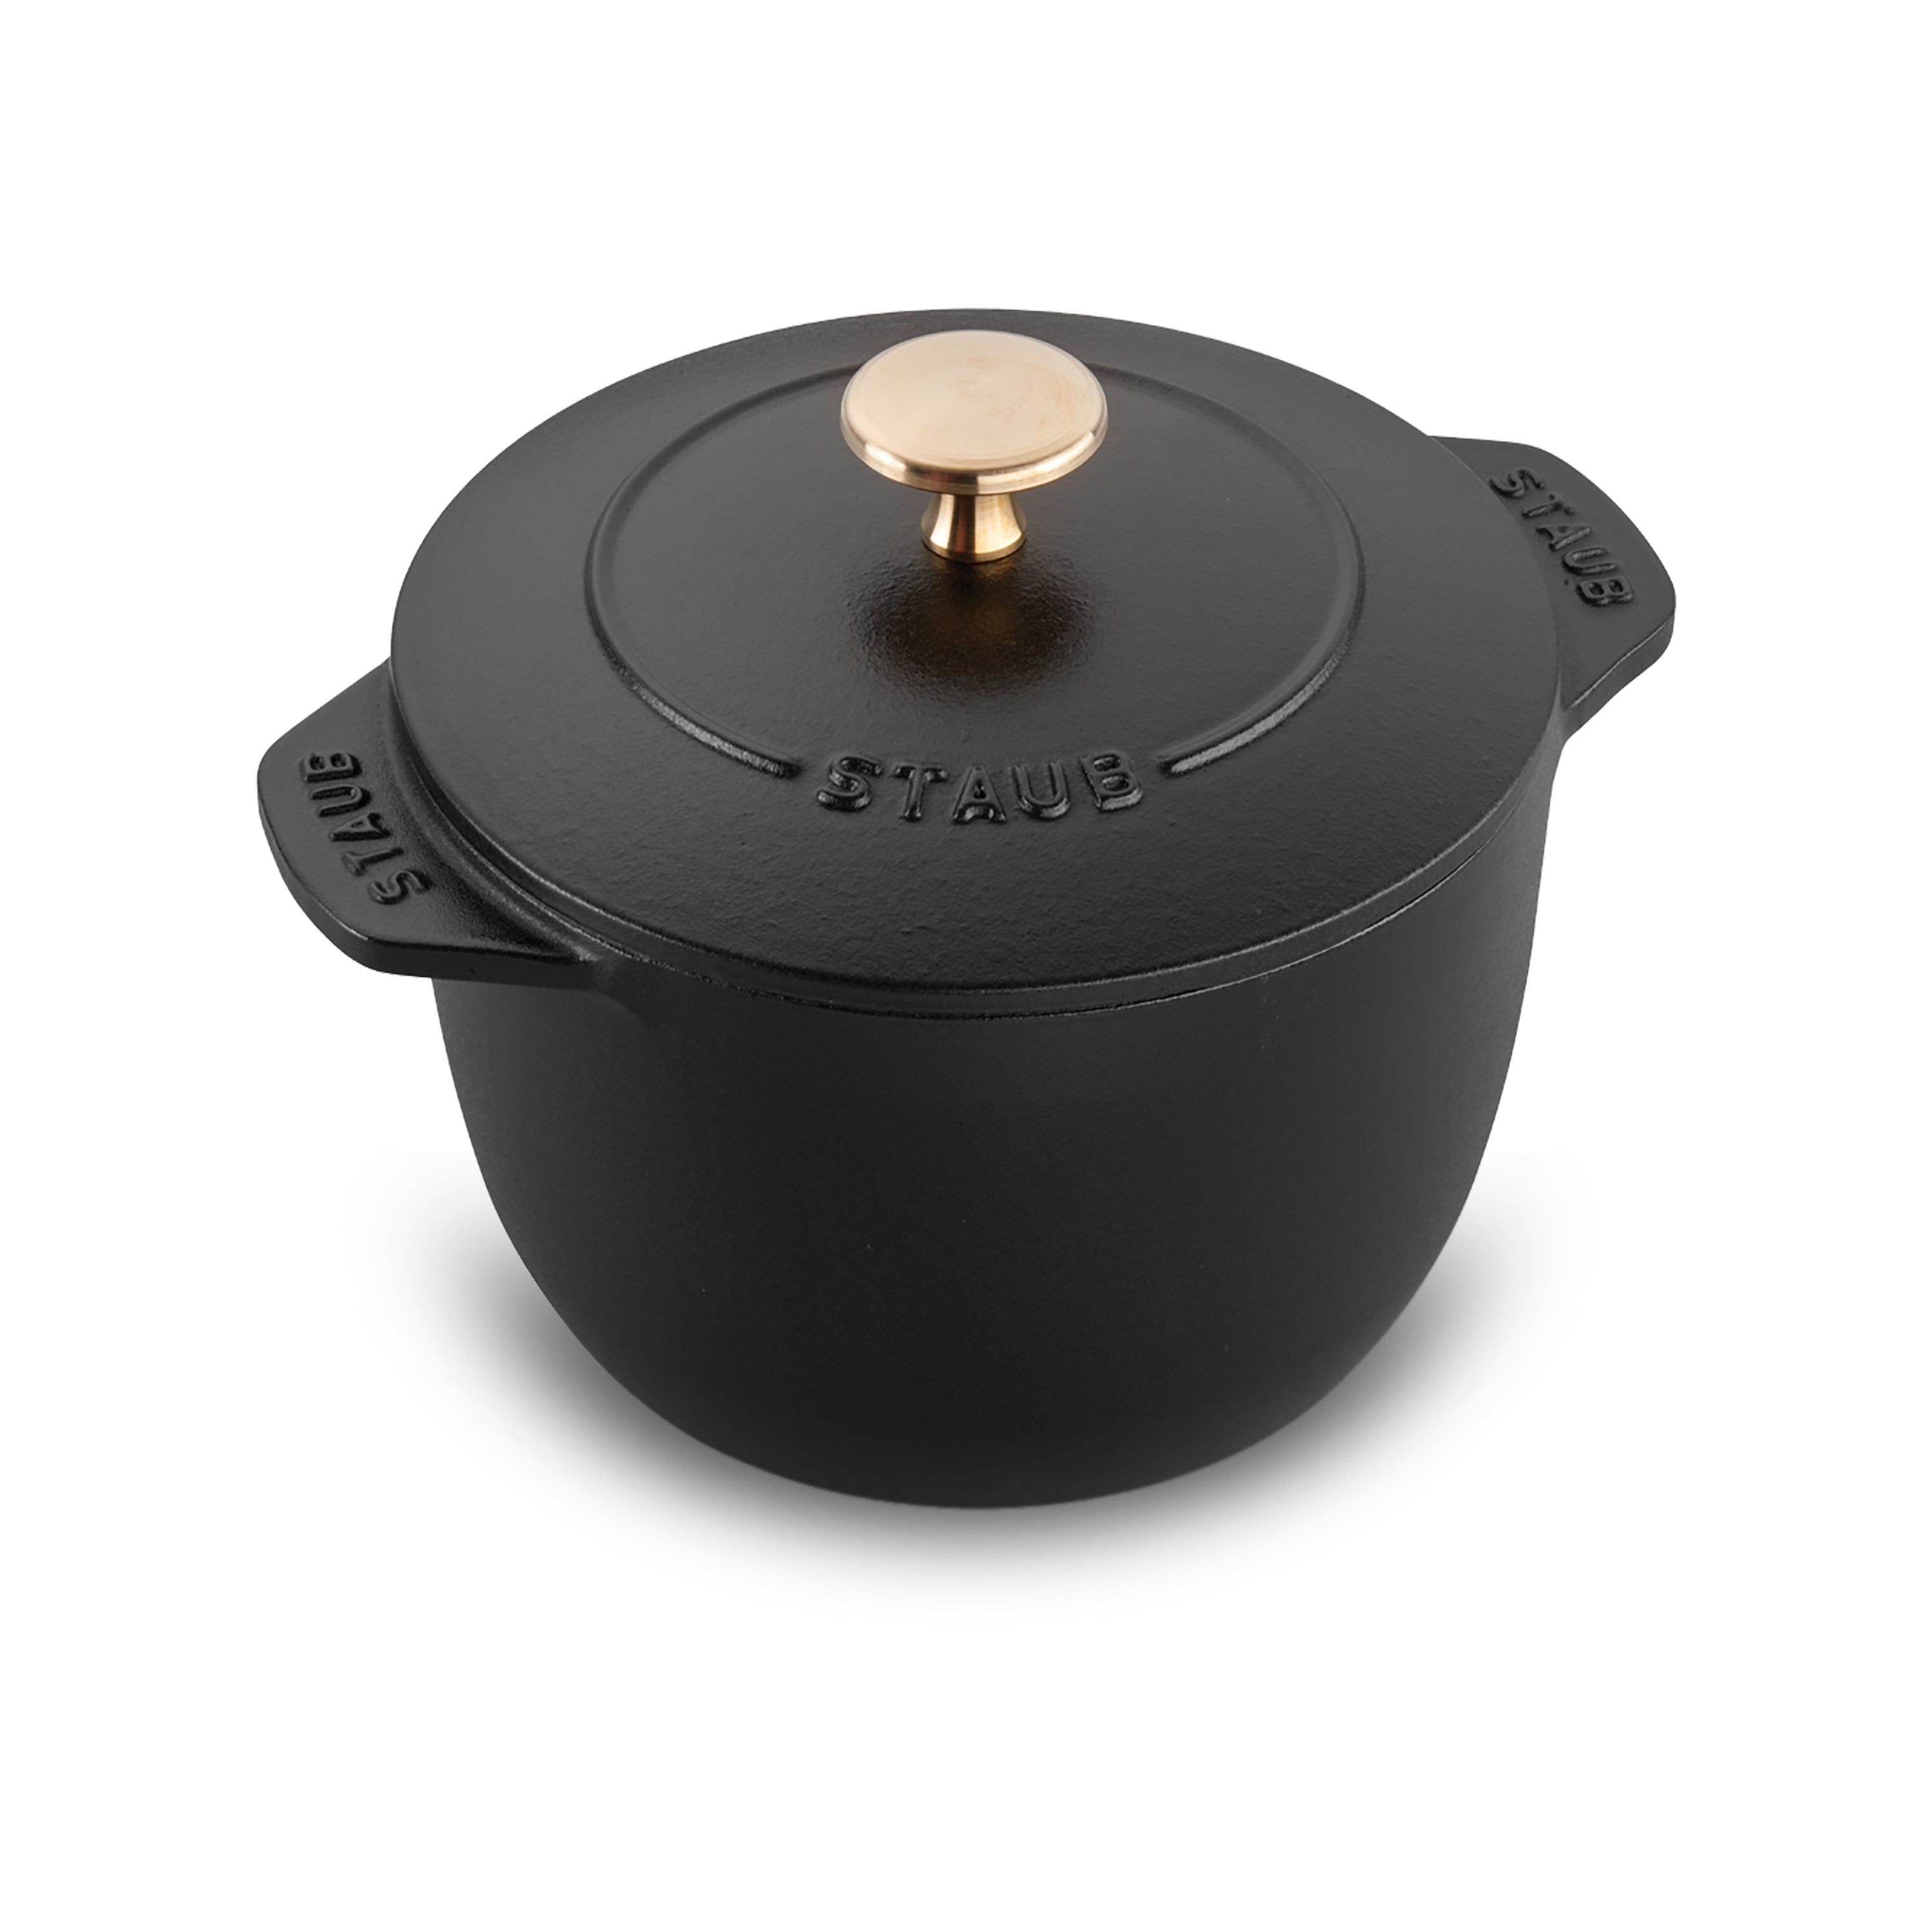 Staub's Petite French Oven is My New Favorite Stovetop Rice Cooker